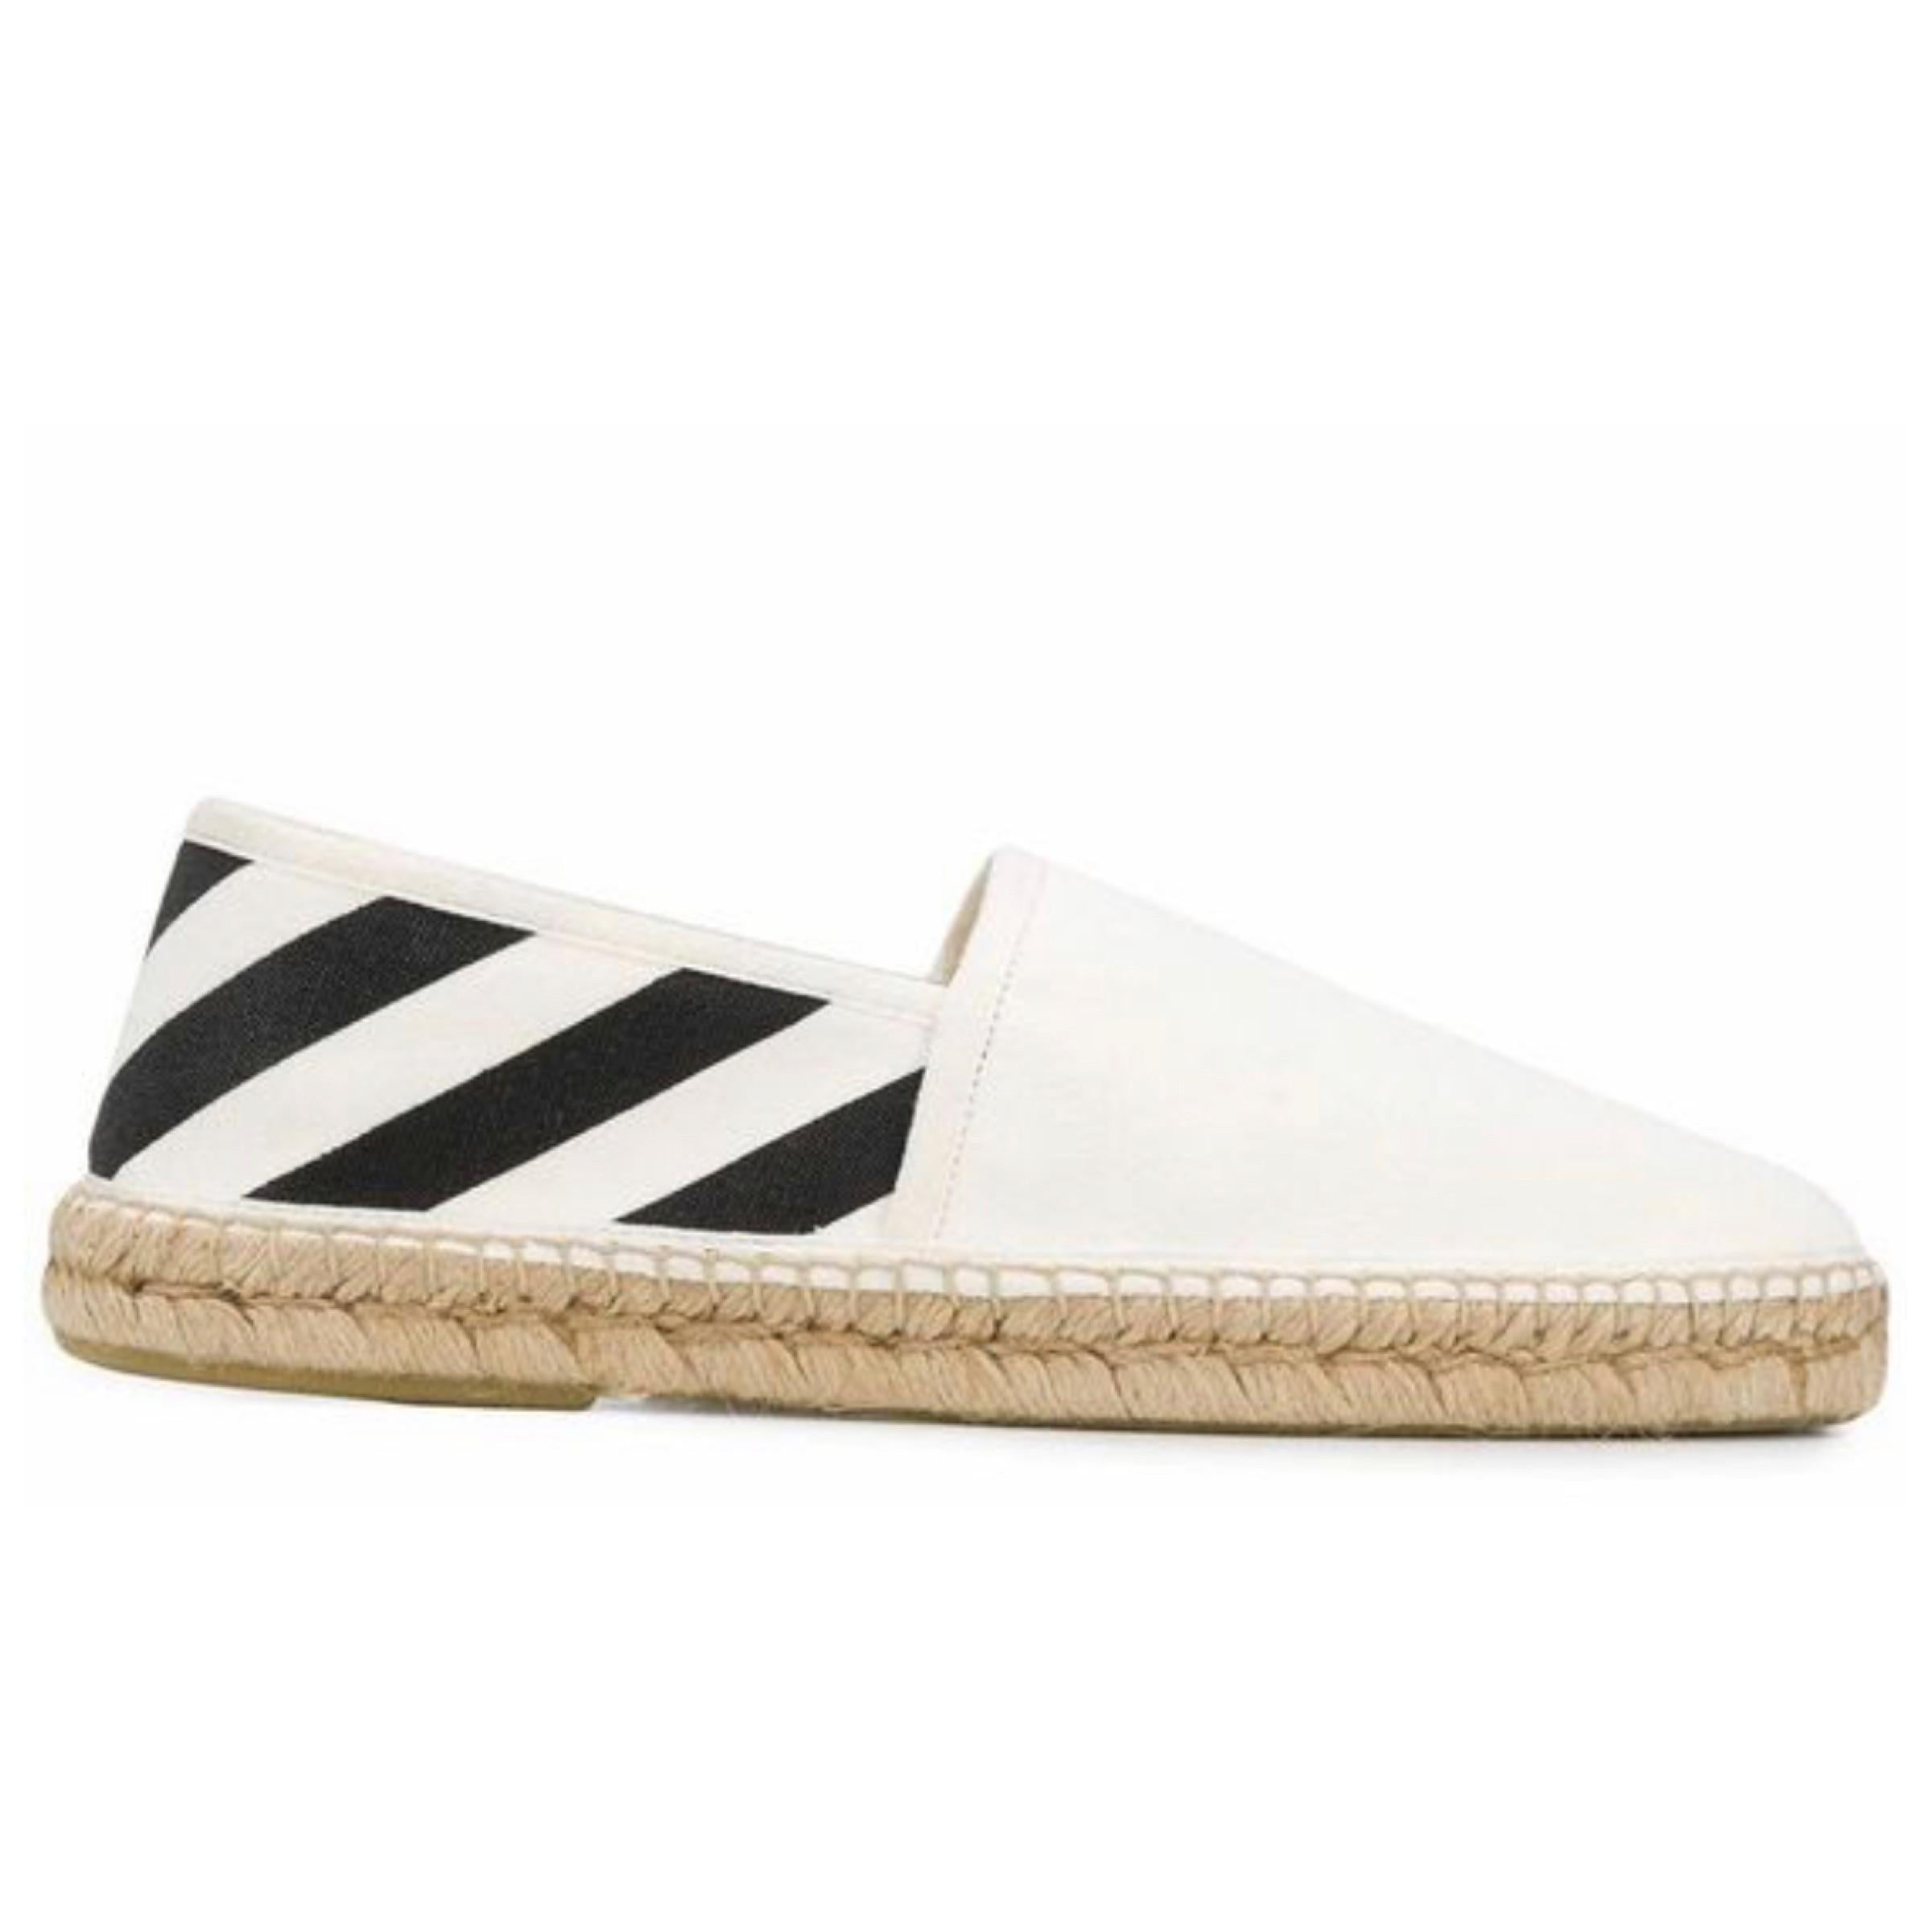 New Off-white Virgil Abloh White Striped Espadrilles Shoes

Authenticity Guaranteed

DETAILS
Brand: Off-white c/o Virgil Abloh
Condition: Brand new
Gender: Men
Category: Espadrille
Color: White
Material: Cotton
Black and white stripes
Round